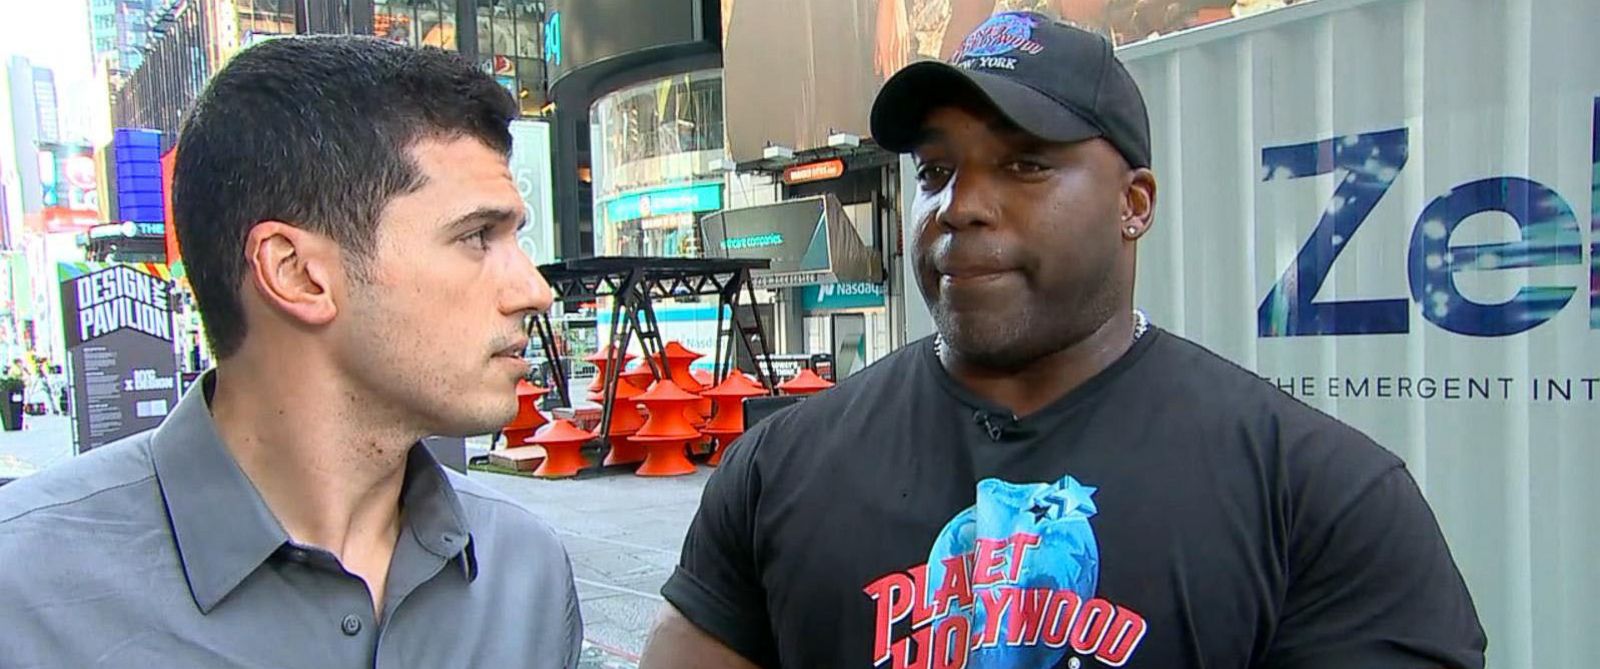 Meet The Guy Who Tackled The Times Square Driver